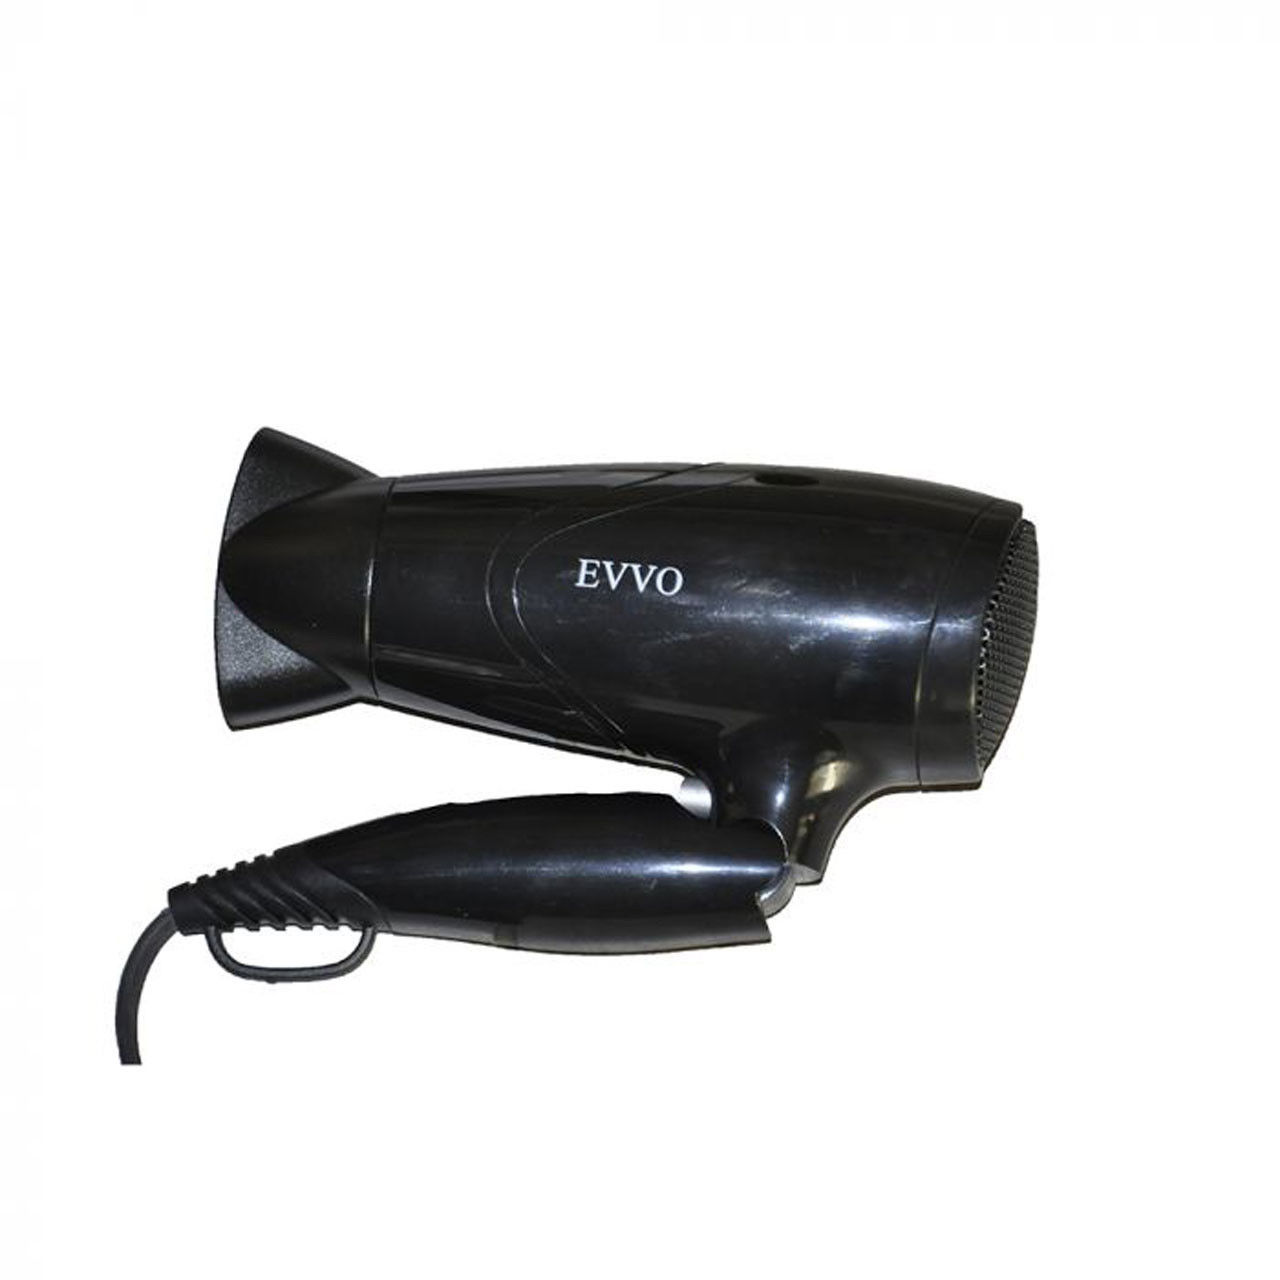 Is this a foldable hair dryer that I can easily store?